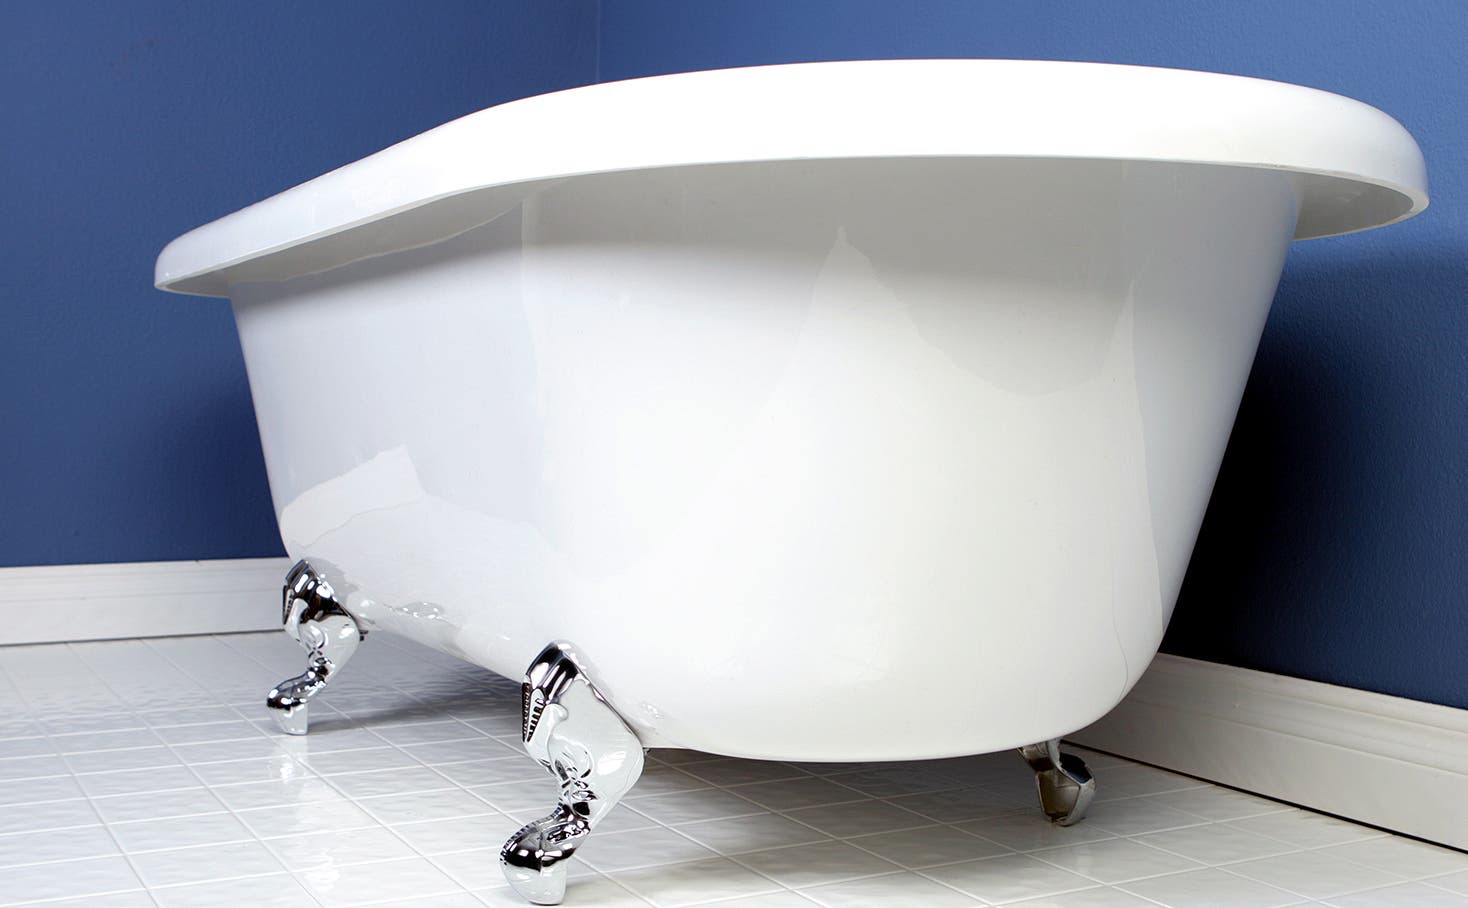 Exploring the terminology behind clawfoot tub fixtures